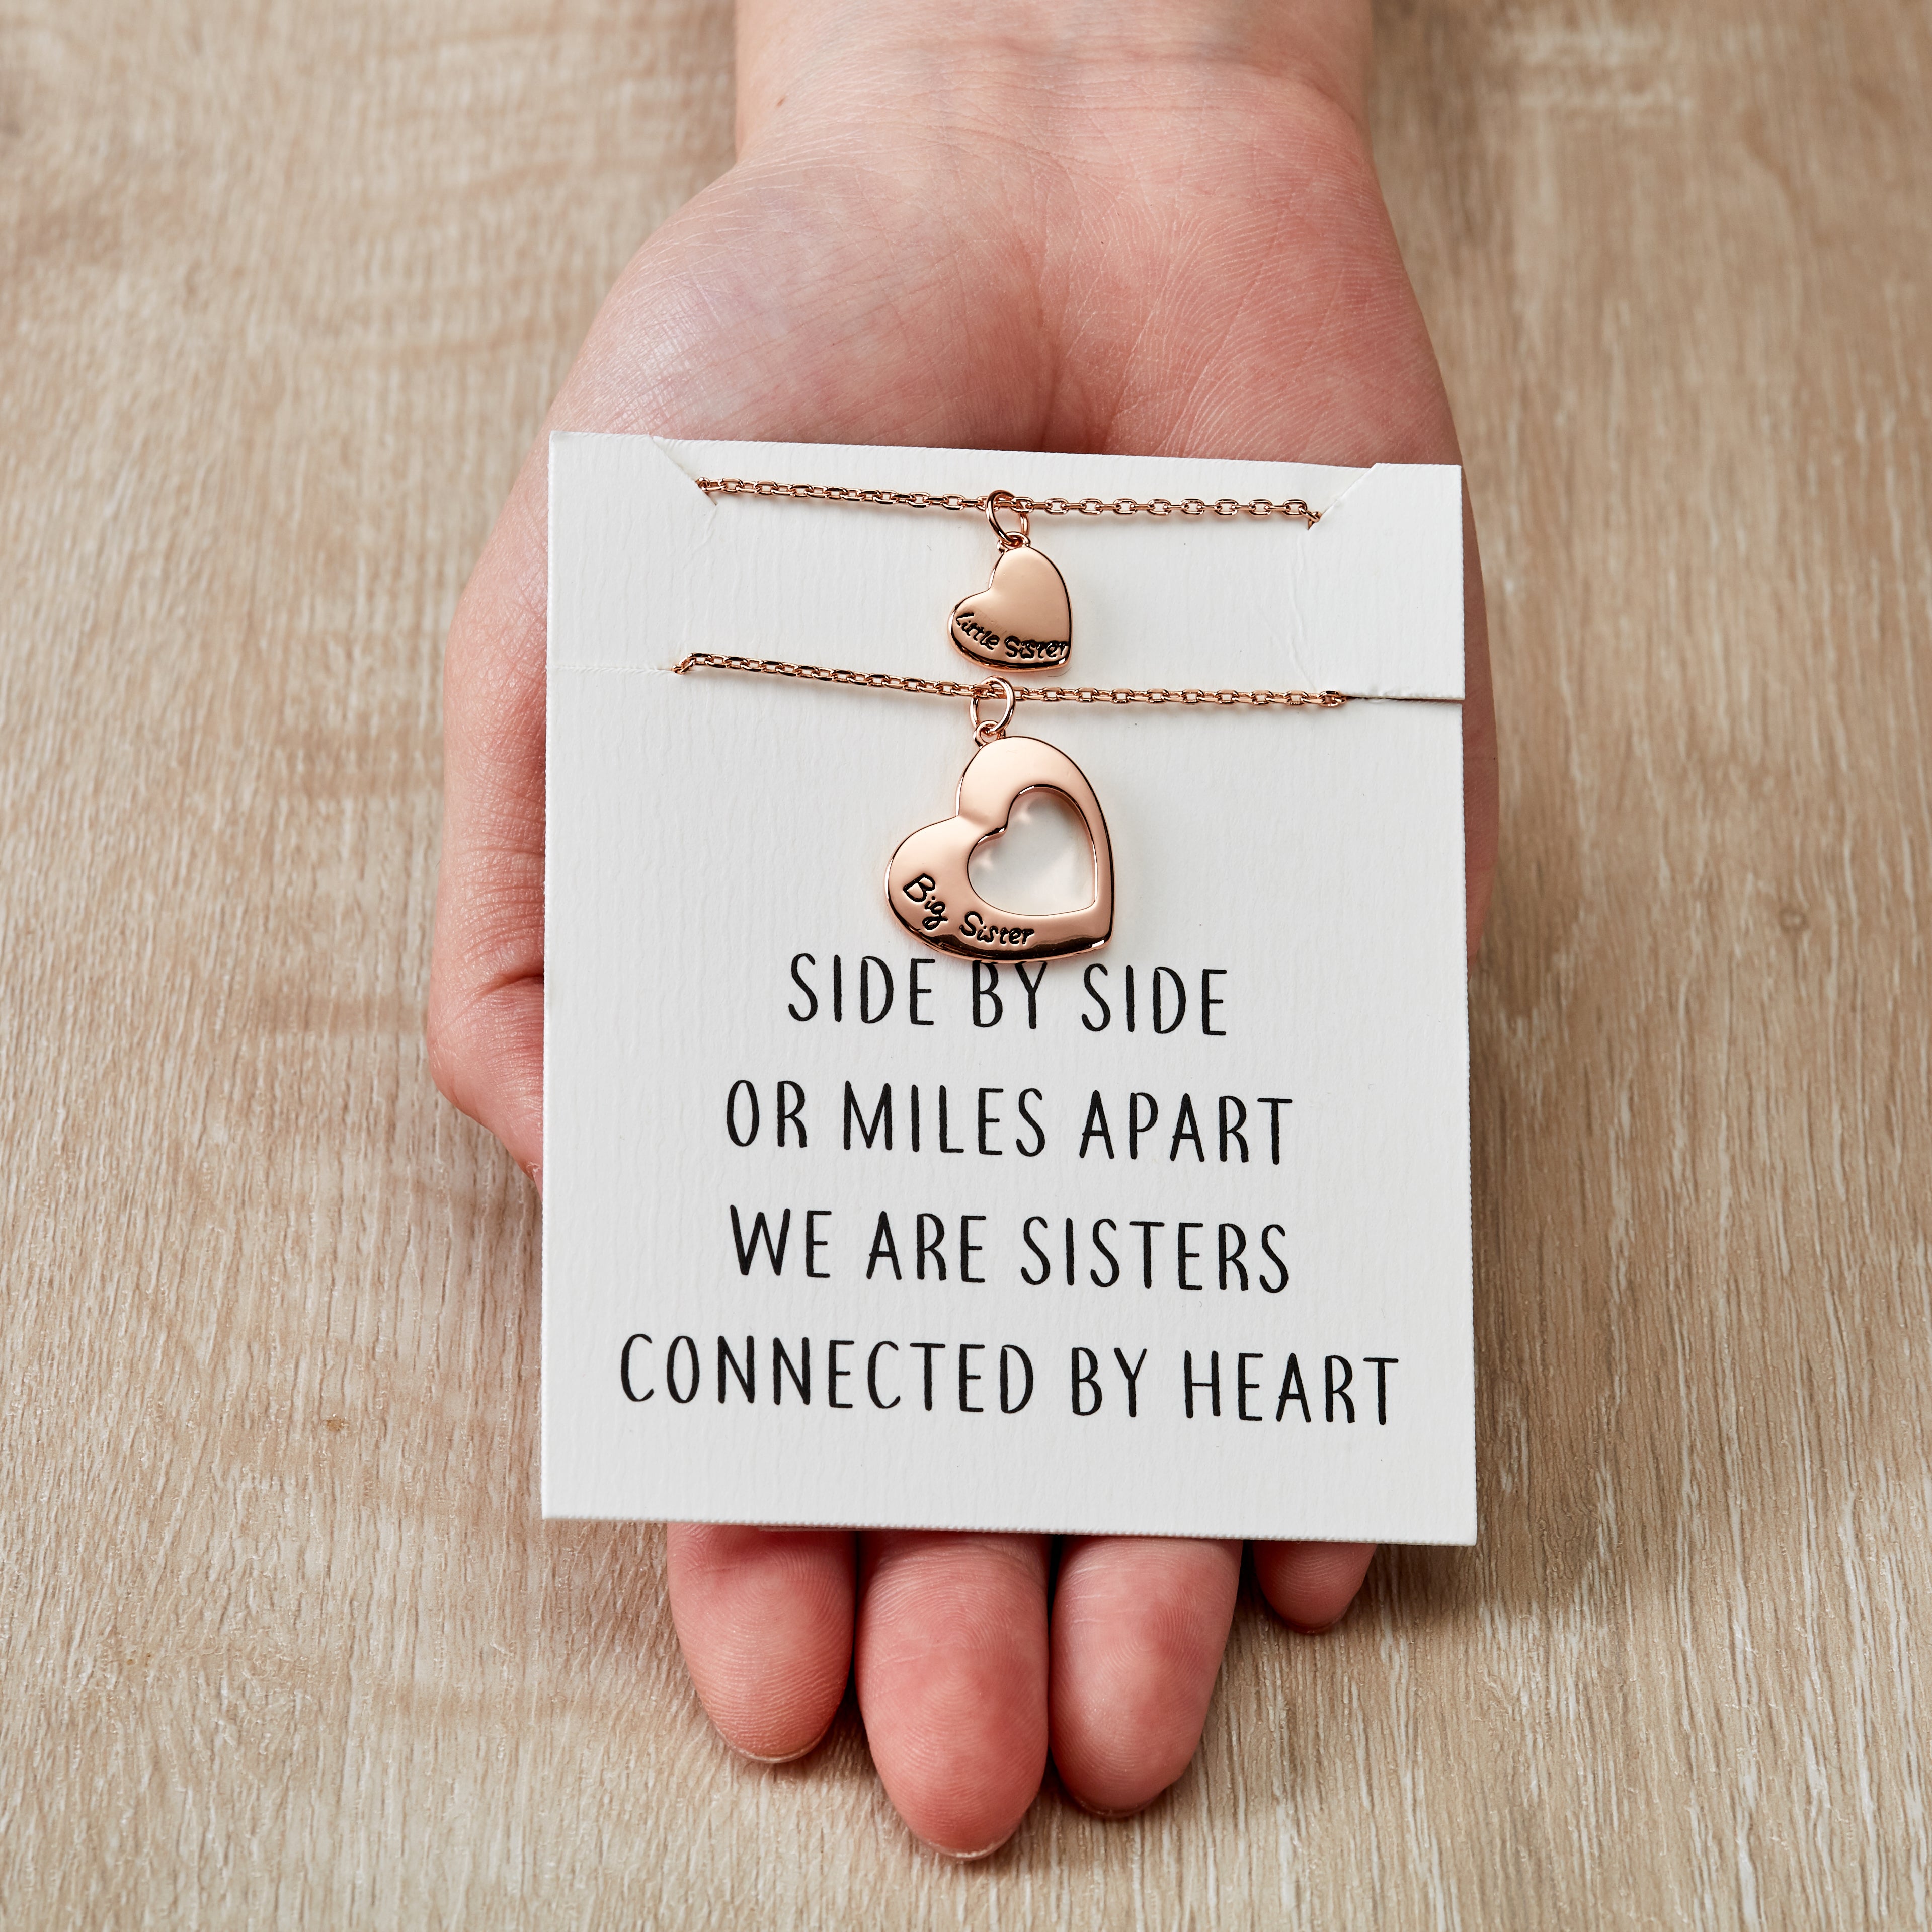 Rose Gold Plated Big Sister and Little Sister Necklace Set with Quote Card